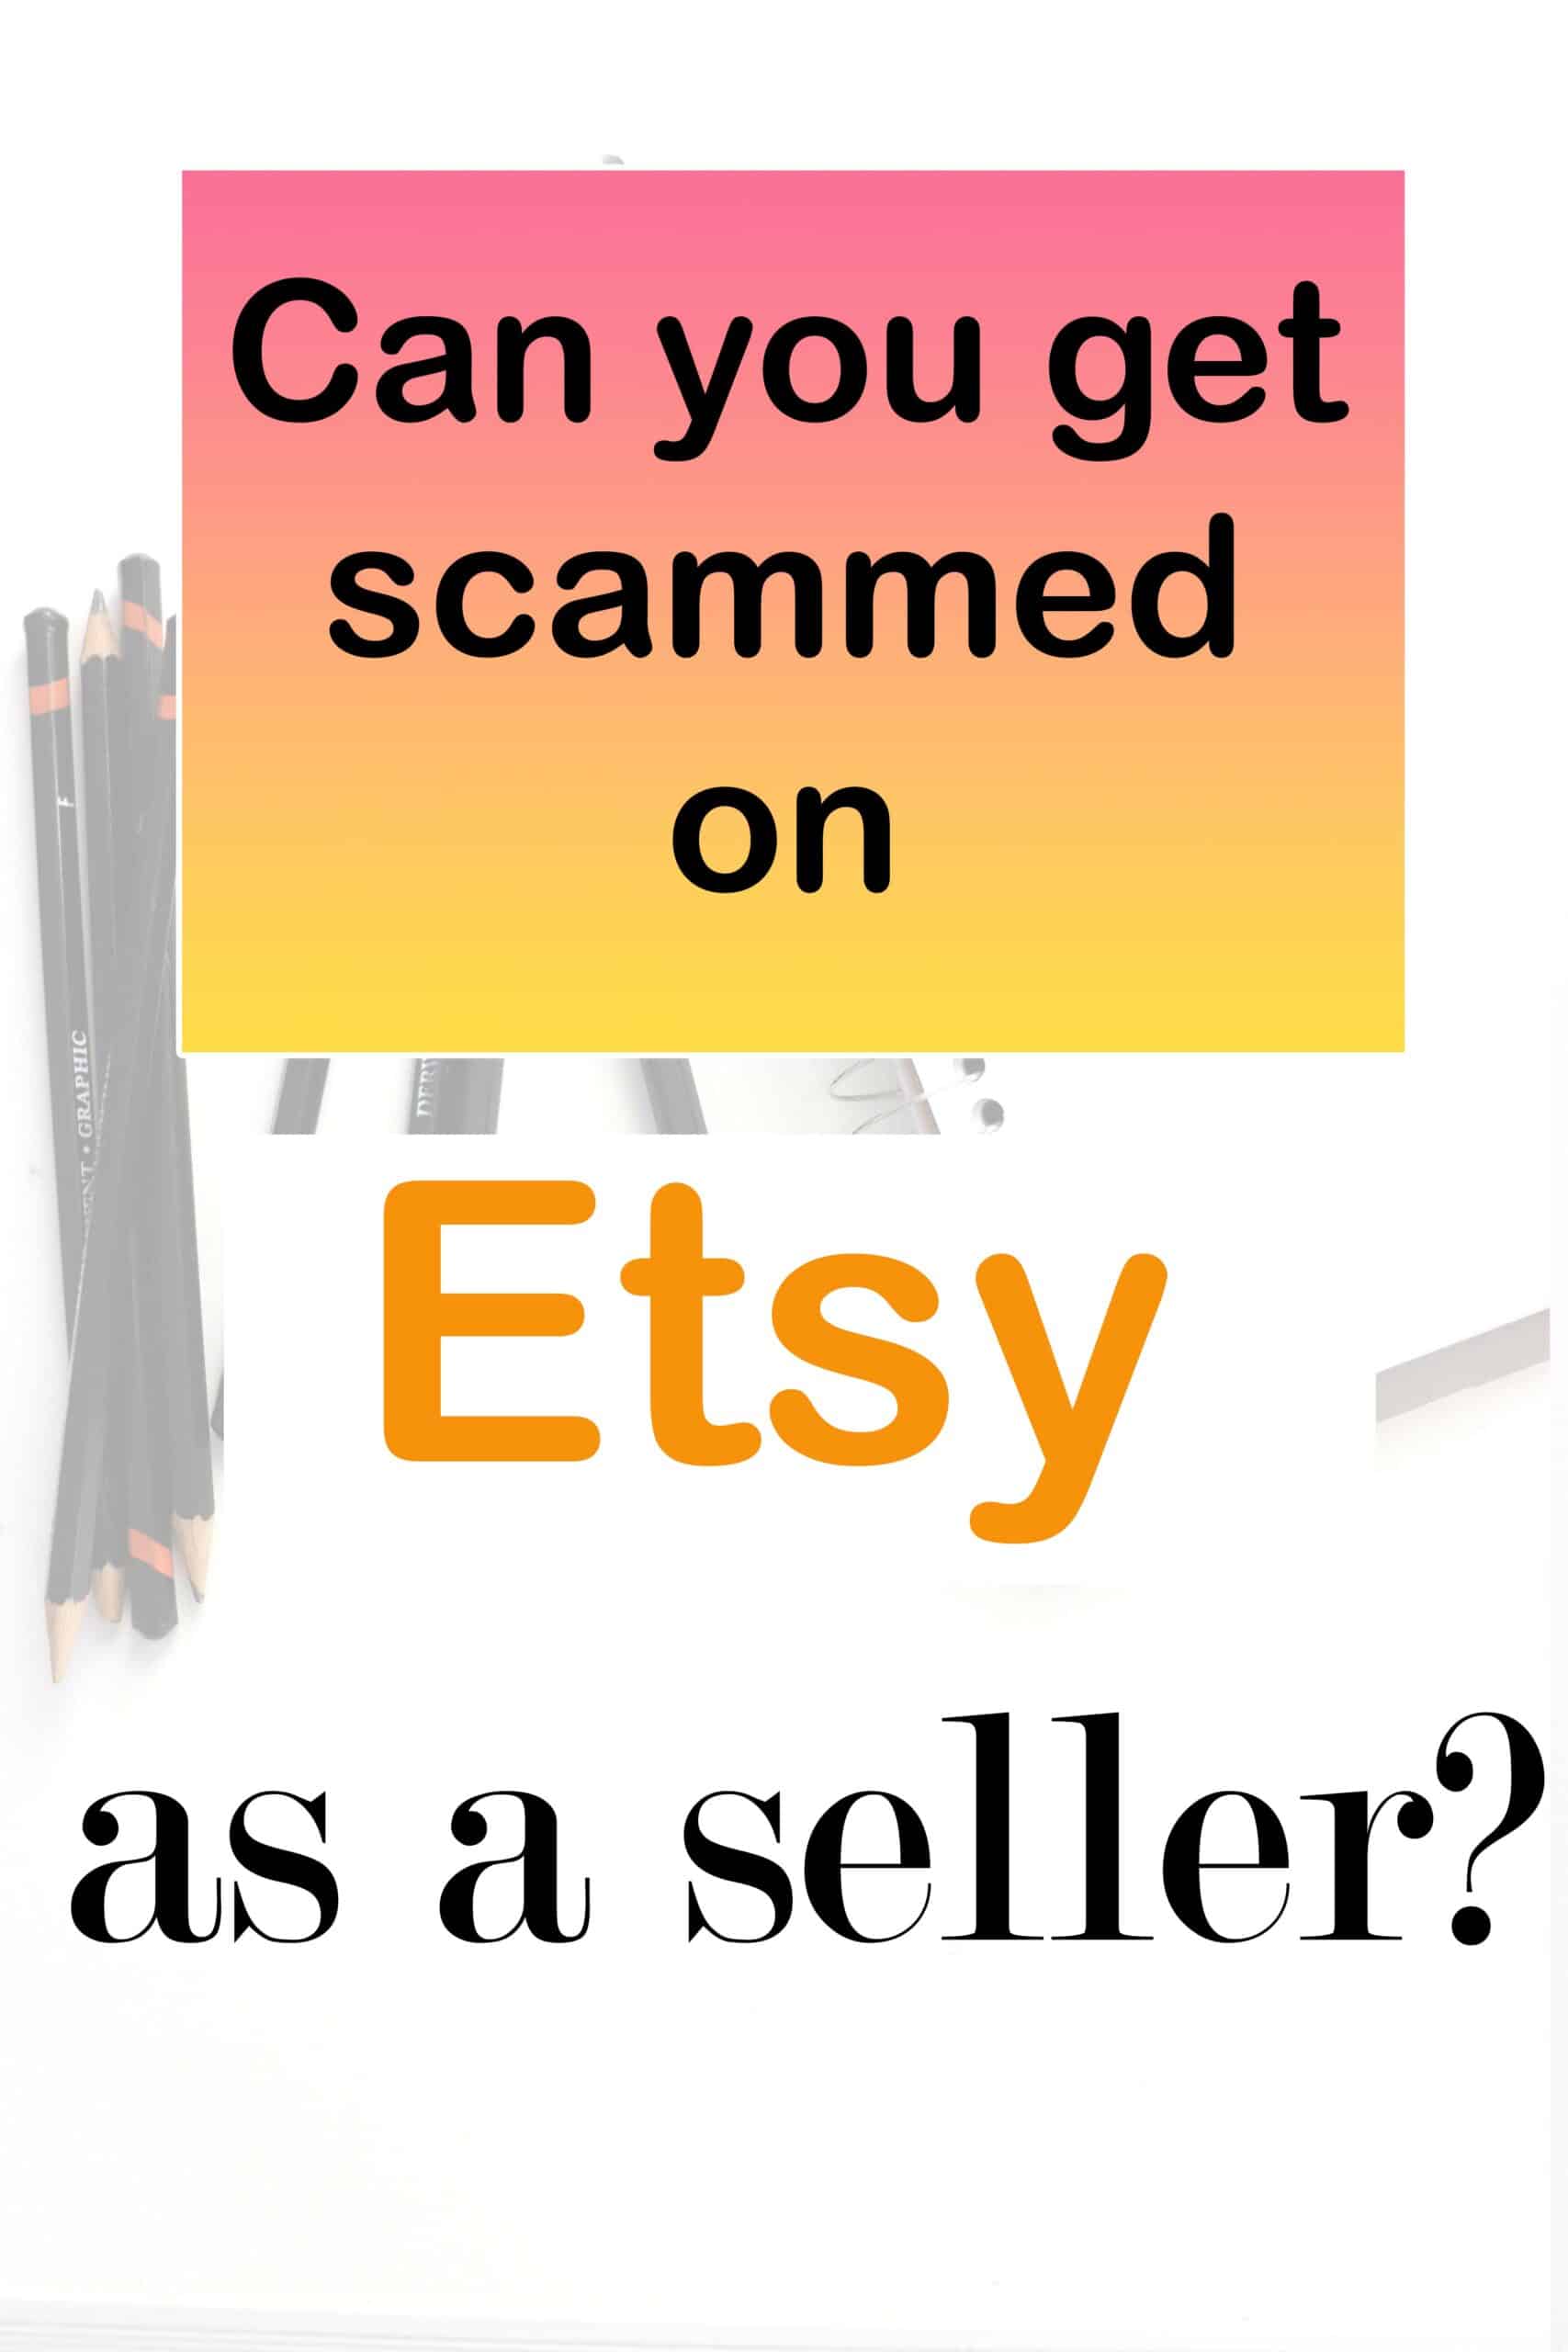 Can You Get Scammed On Etsy As A Seller? – Artisan Shopper